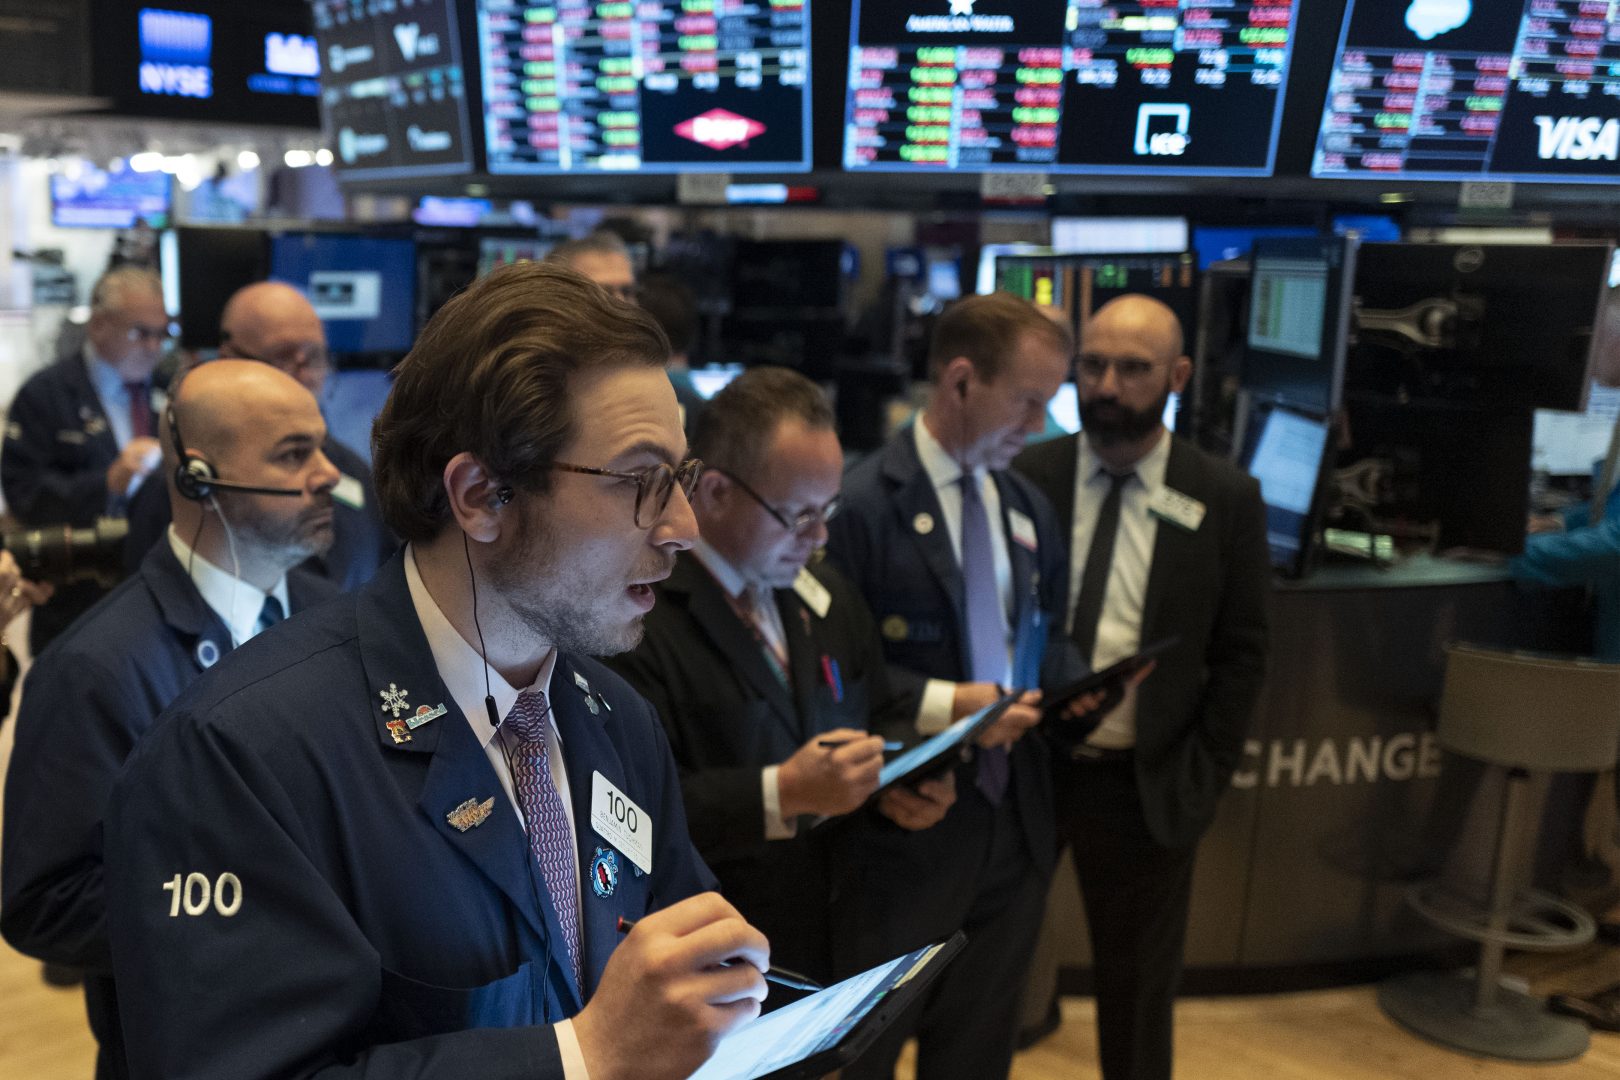 Traders work at the New York Stock Exchange, Wednesday, March 18, 2020. Global stock markets have sunk in a third day of wild price swings after President Donald Trump promised to prop up the U.S. economy through the coronavirus outbreak.